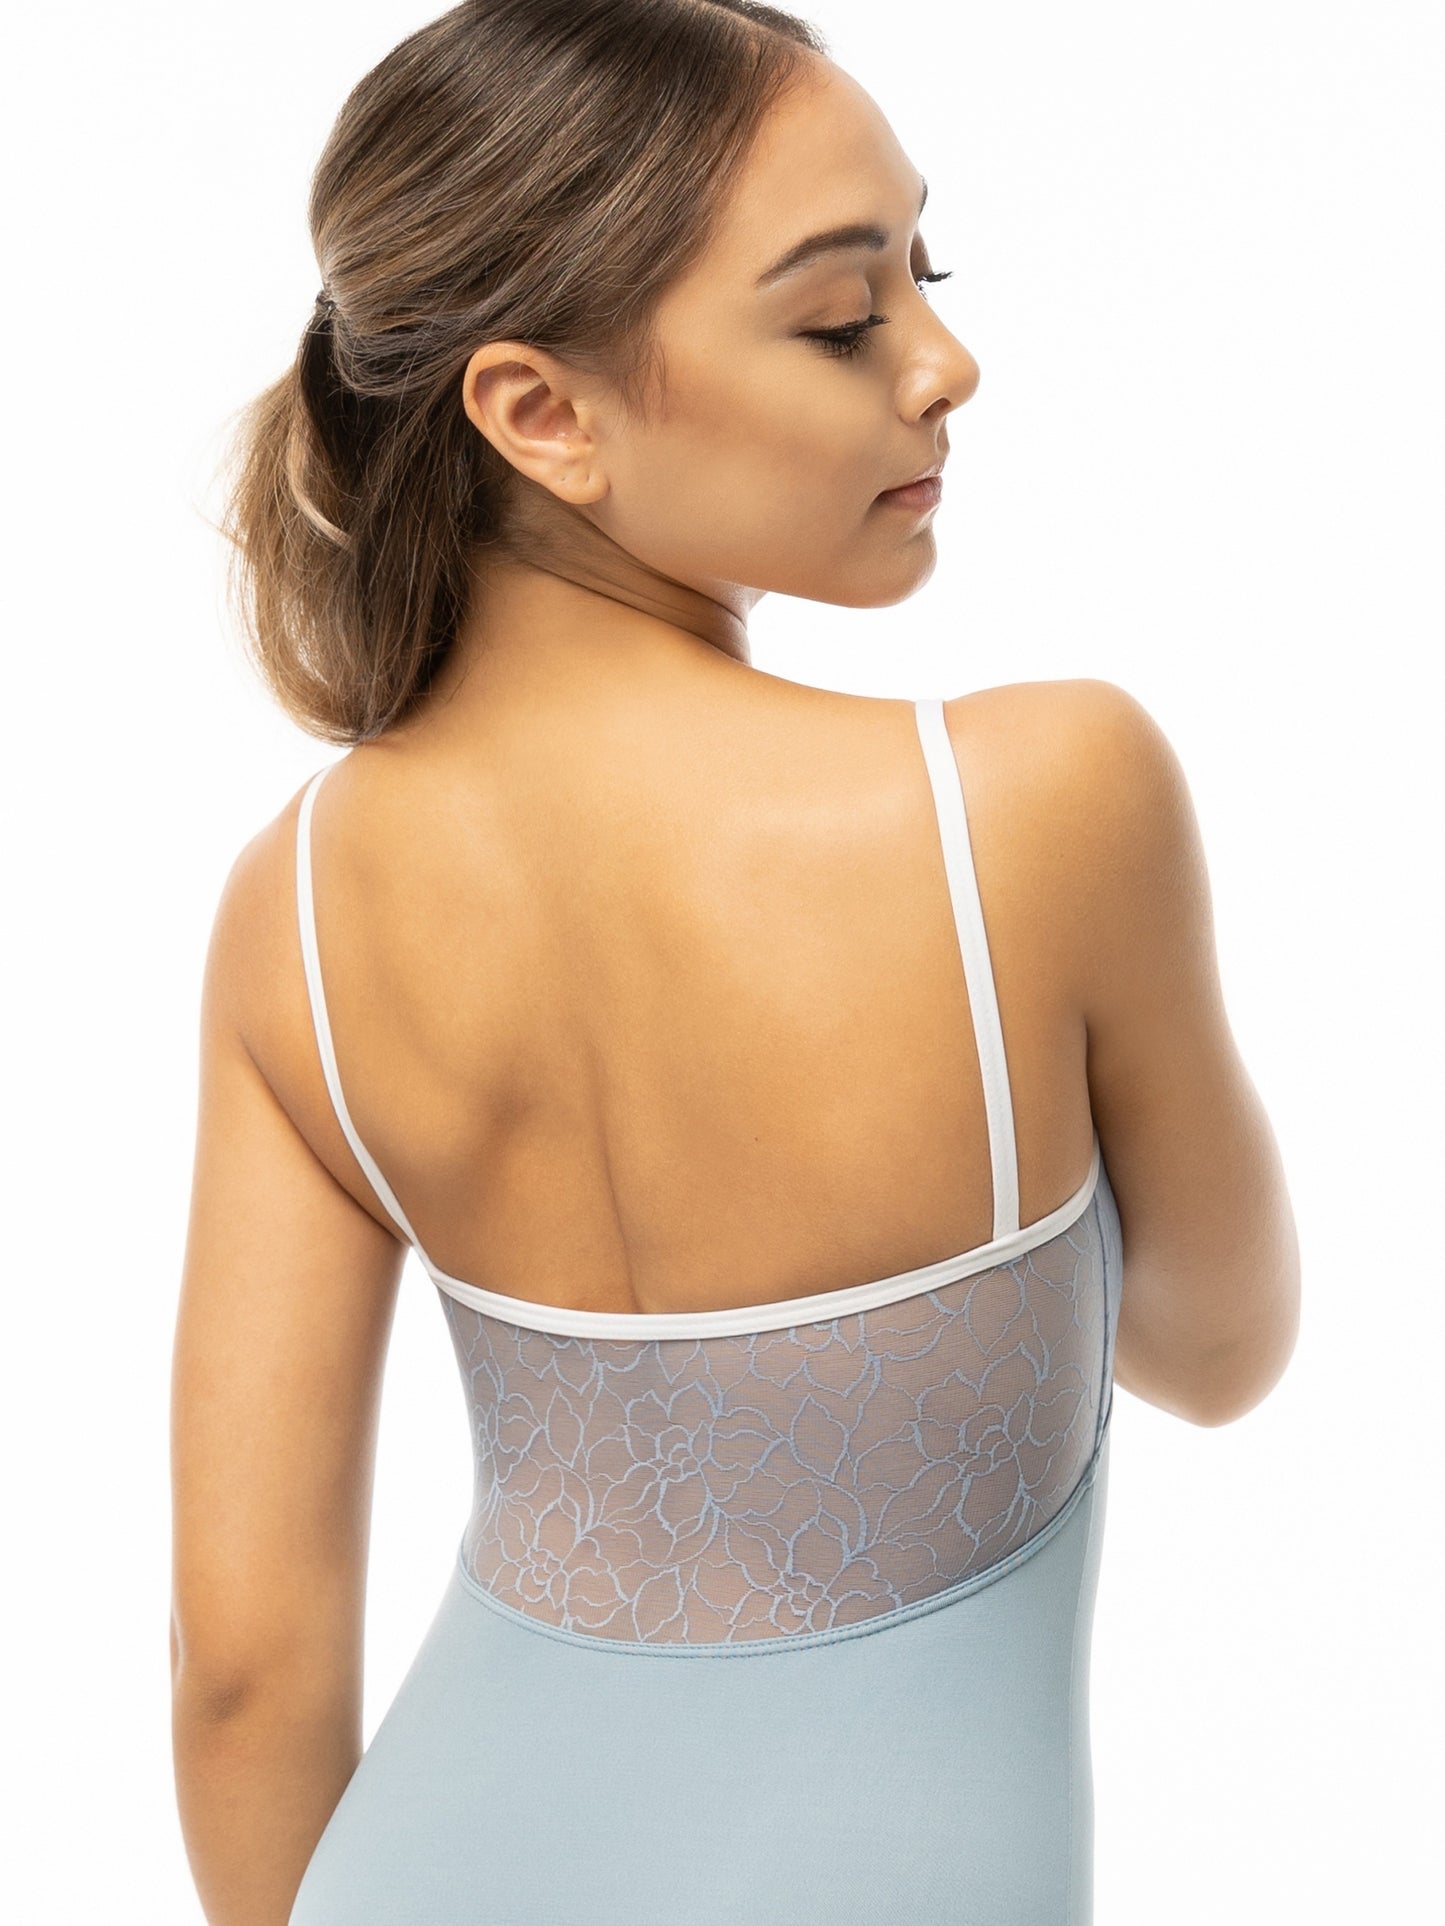 Empire Camisole Leotard with Lace Overlay - 2547A